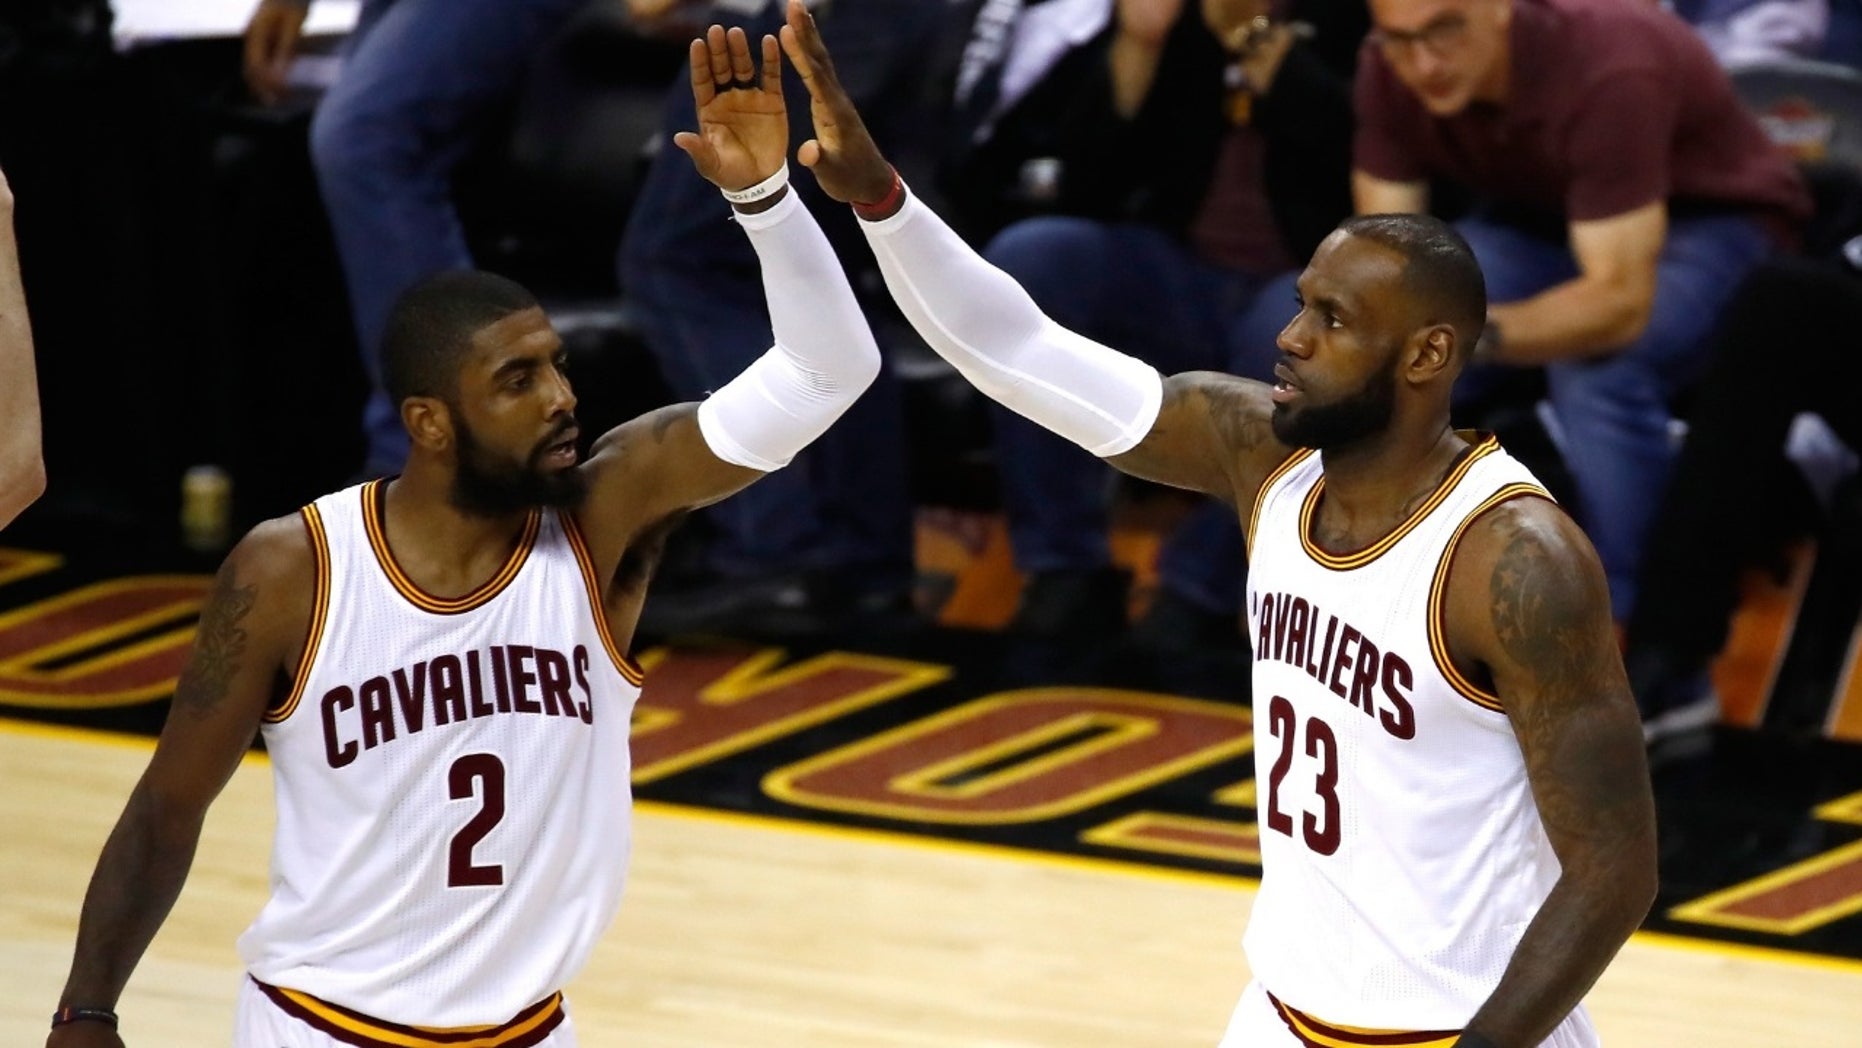 Kyrie Irving called LeBron James to apologize: ‘I wanted to be the guy who led us to a championship’